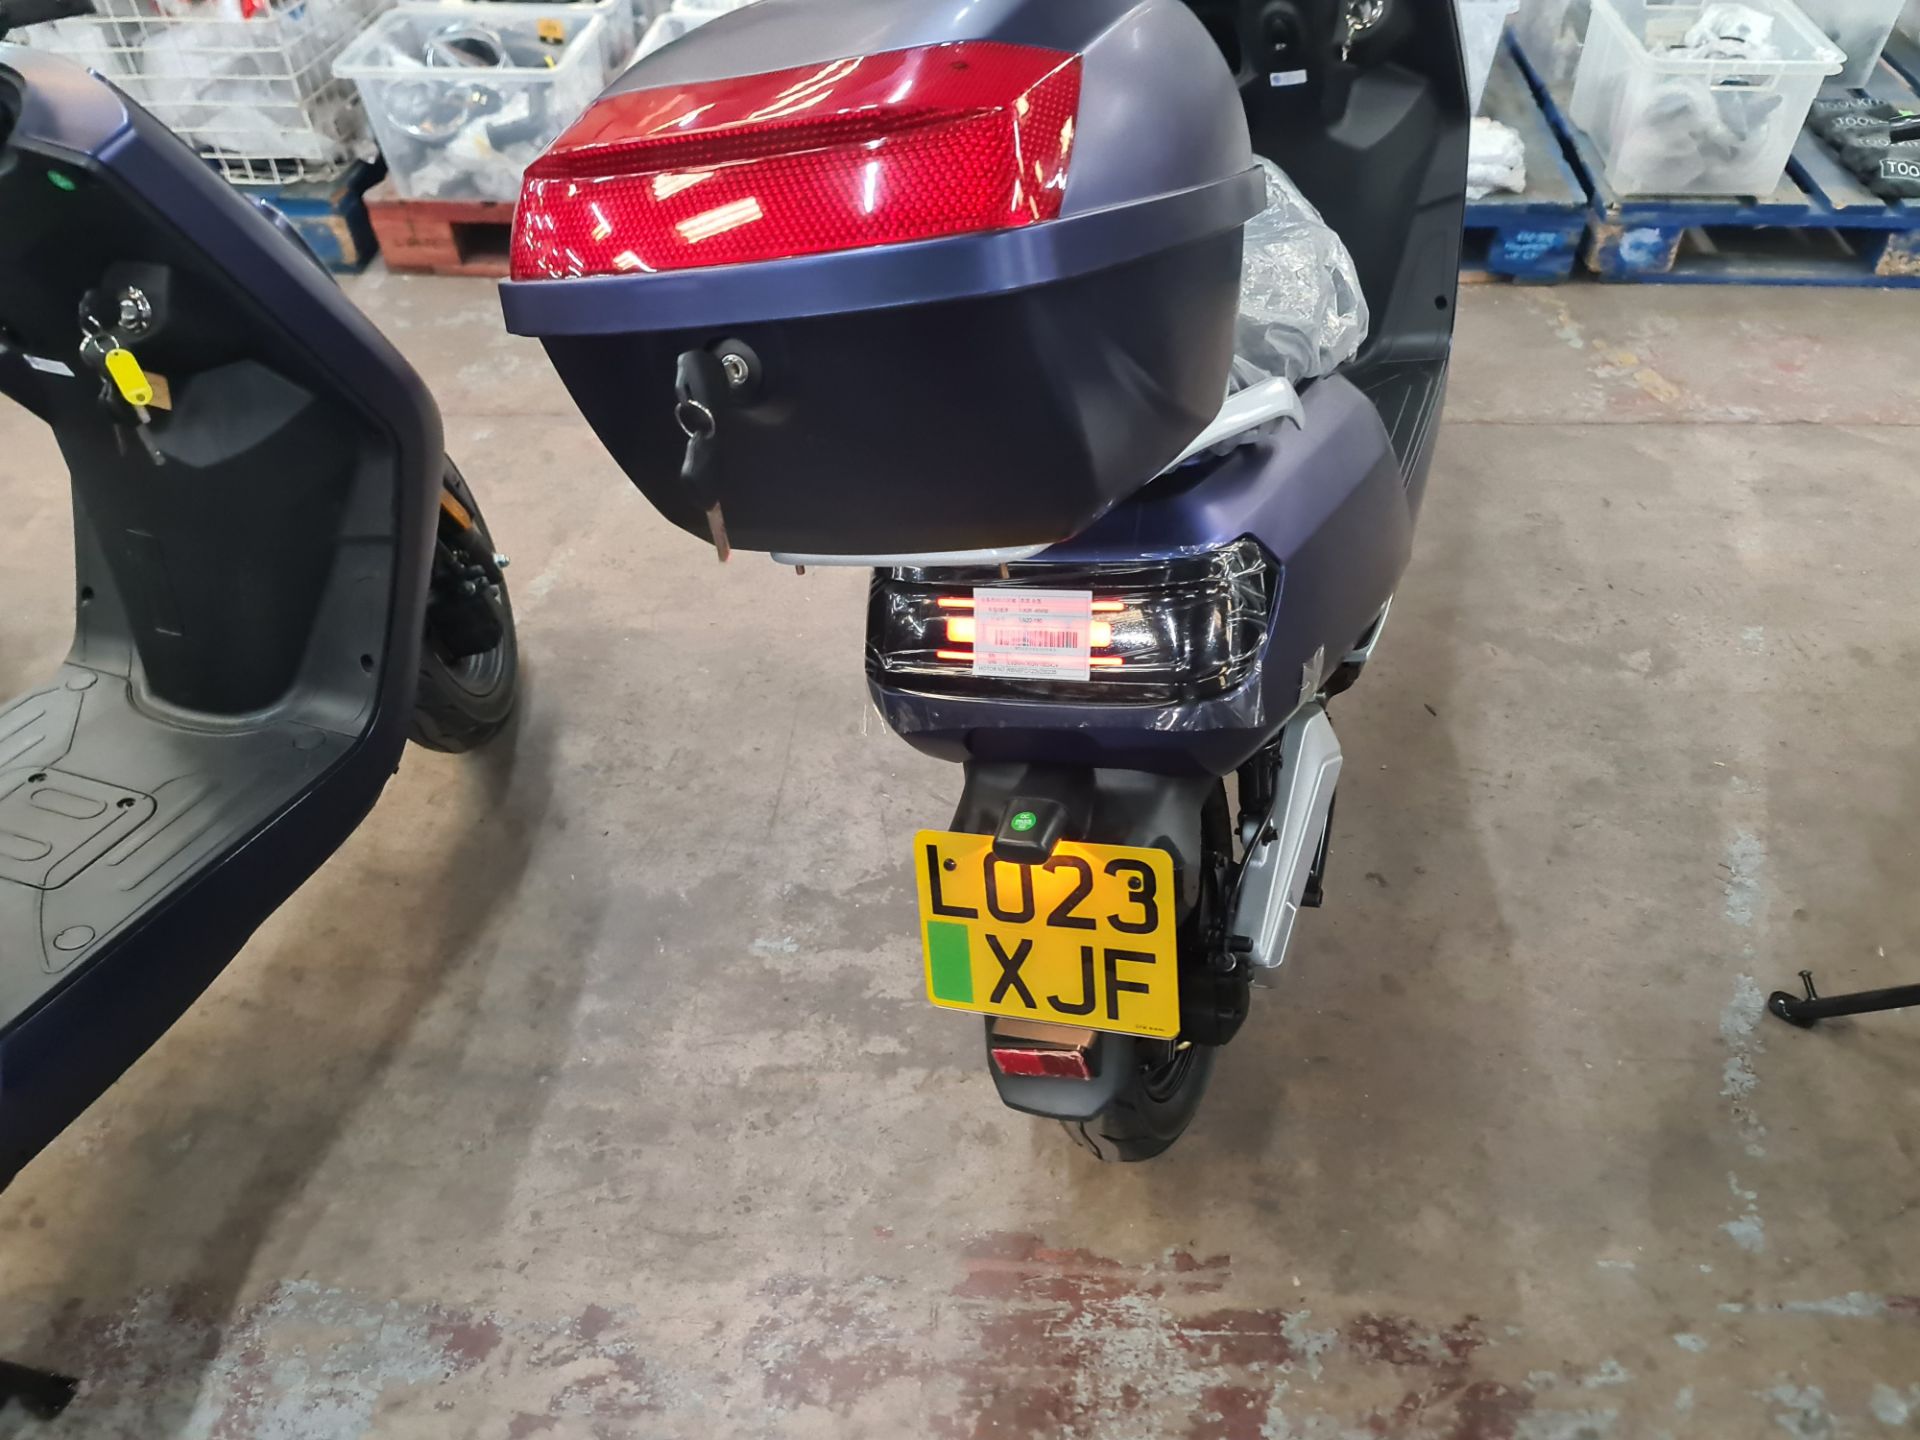 LO23 XJF Senda 3000 dual battery electric moped, colour: blue, 50cc equivalent, 30mph top speed, 90 - Image 12 of 22